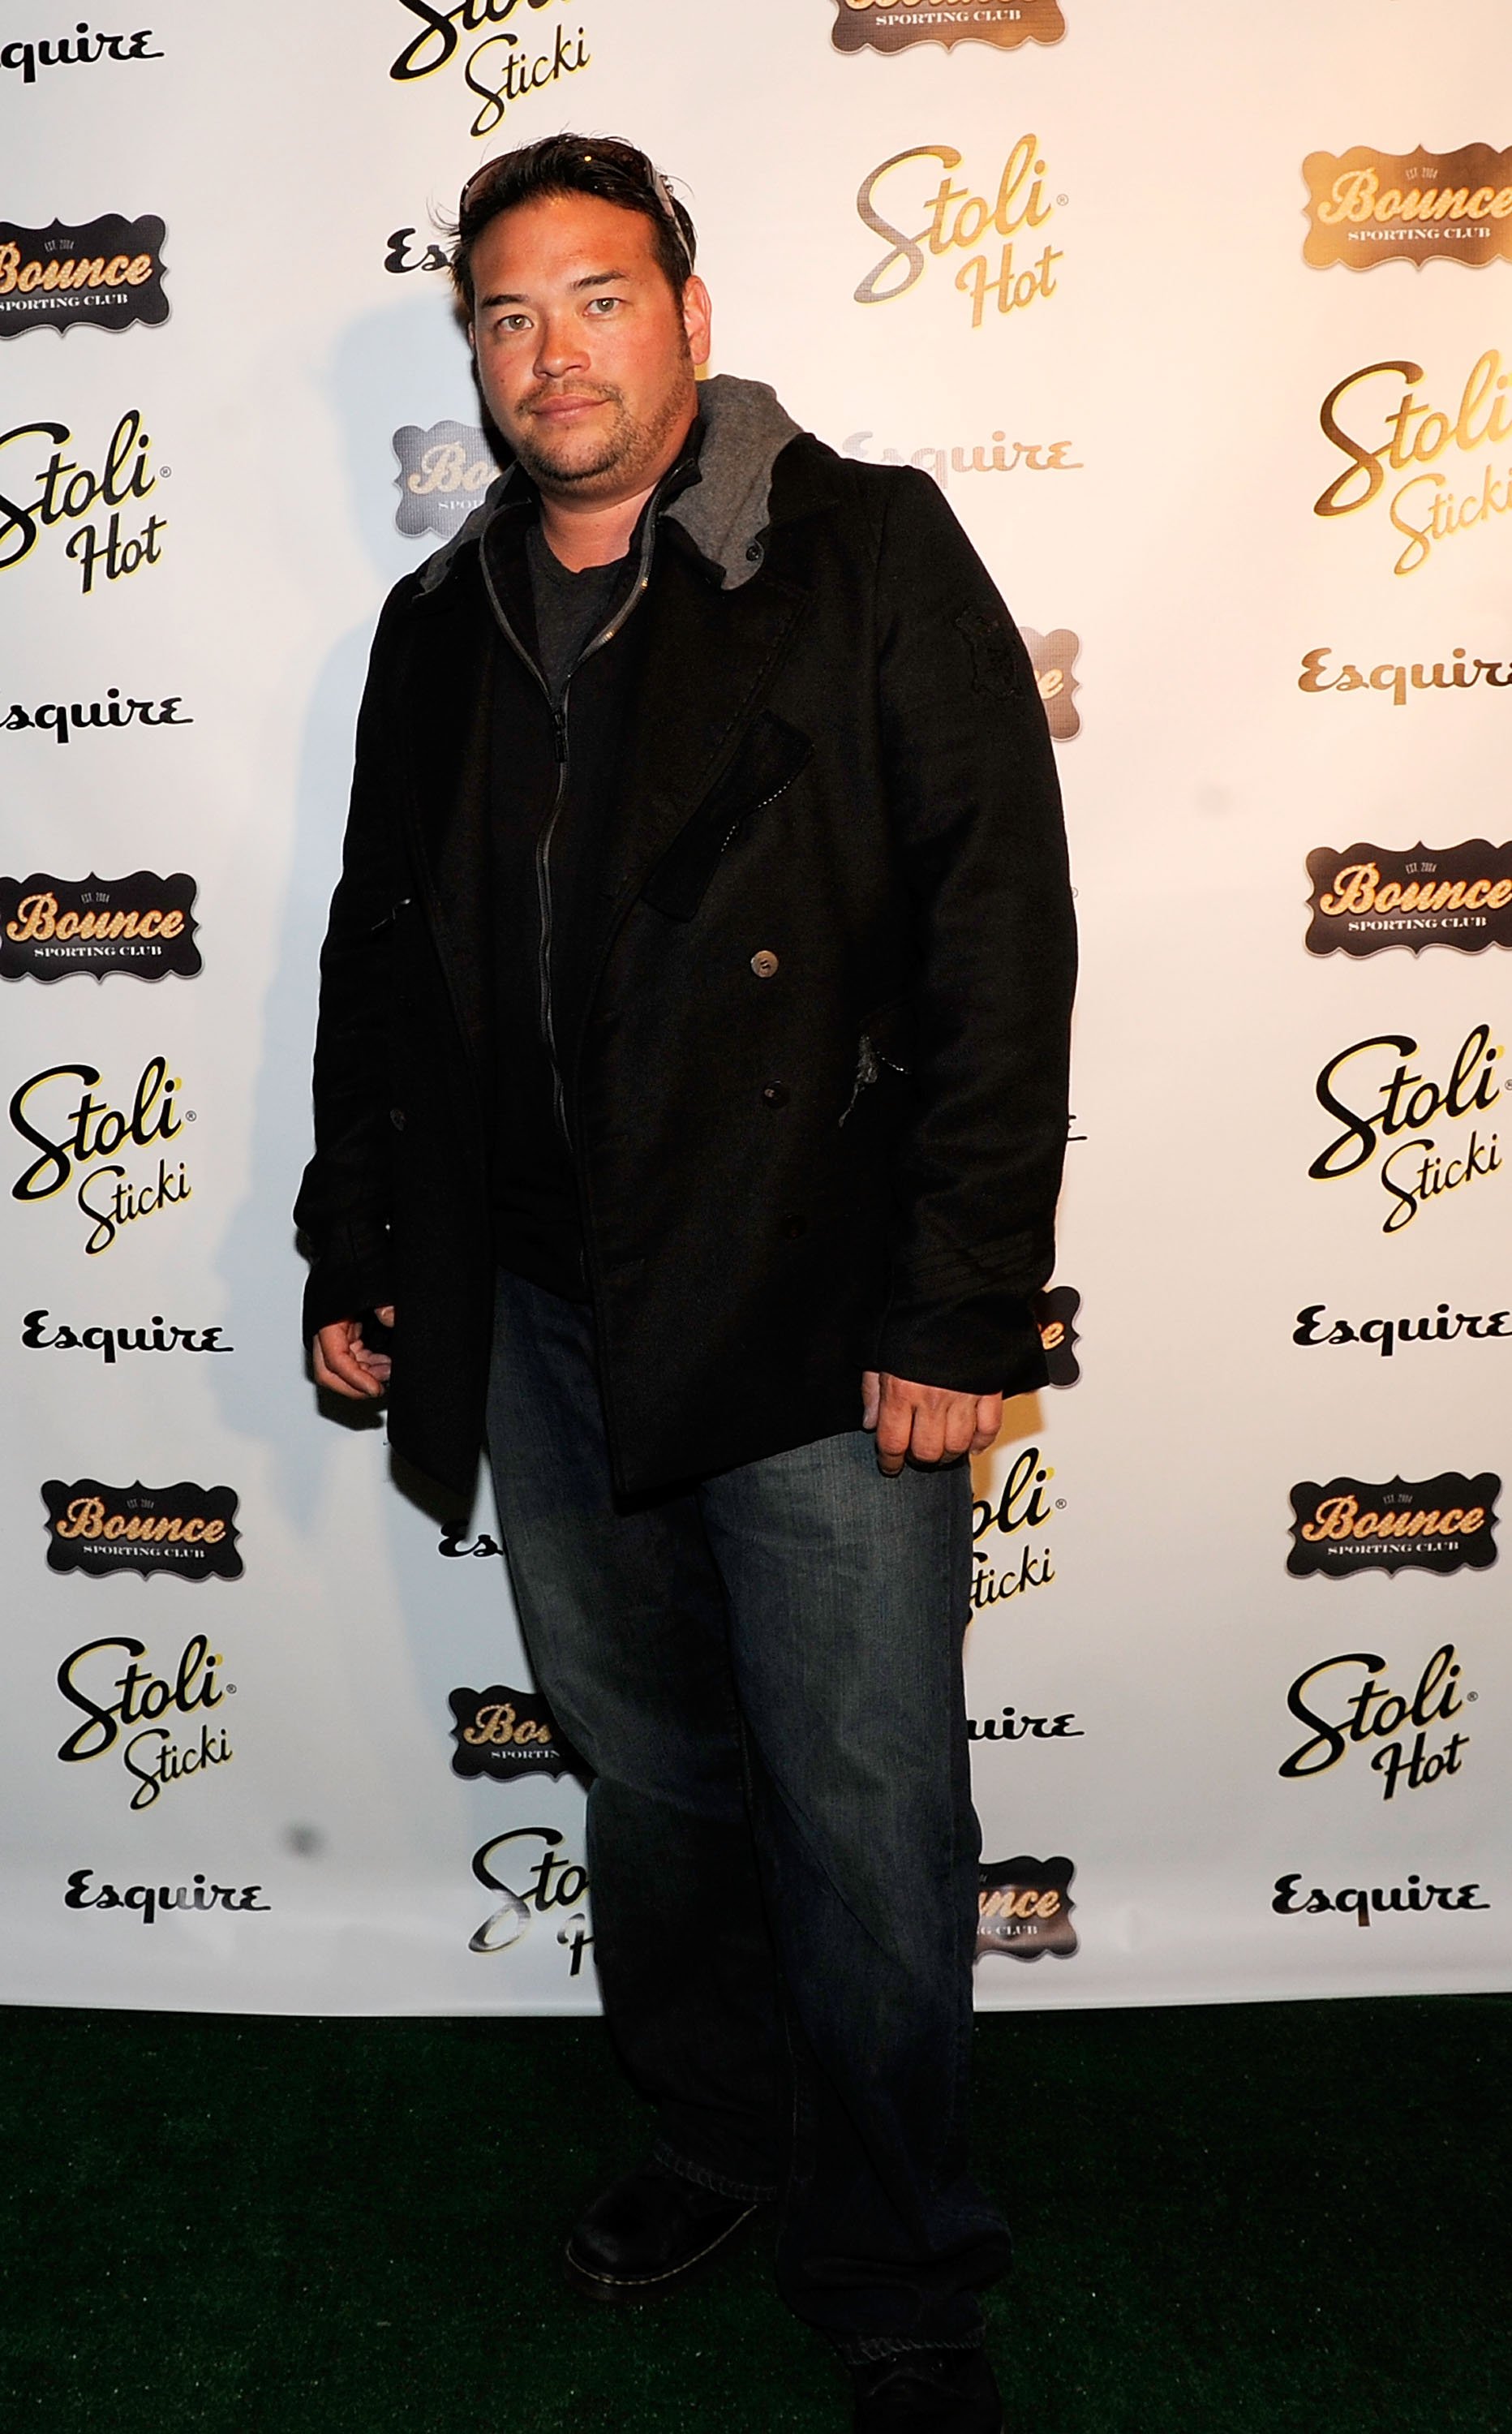 Jon Gosselin attends Toasting the NFL Craft Class kick-off in New York City on April 24, 2012 | Photo: Getty Images